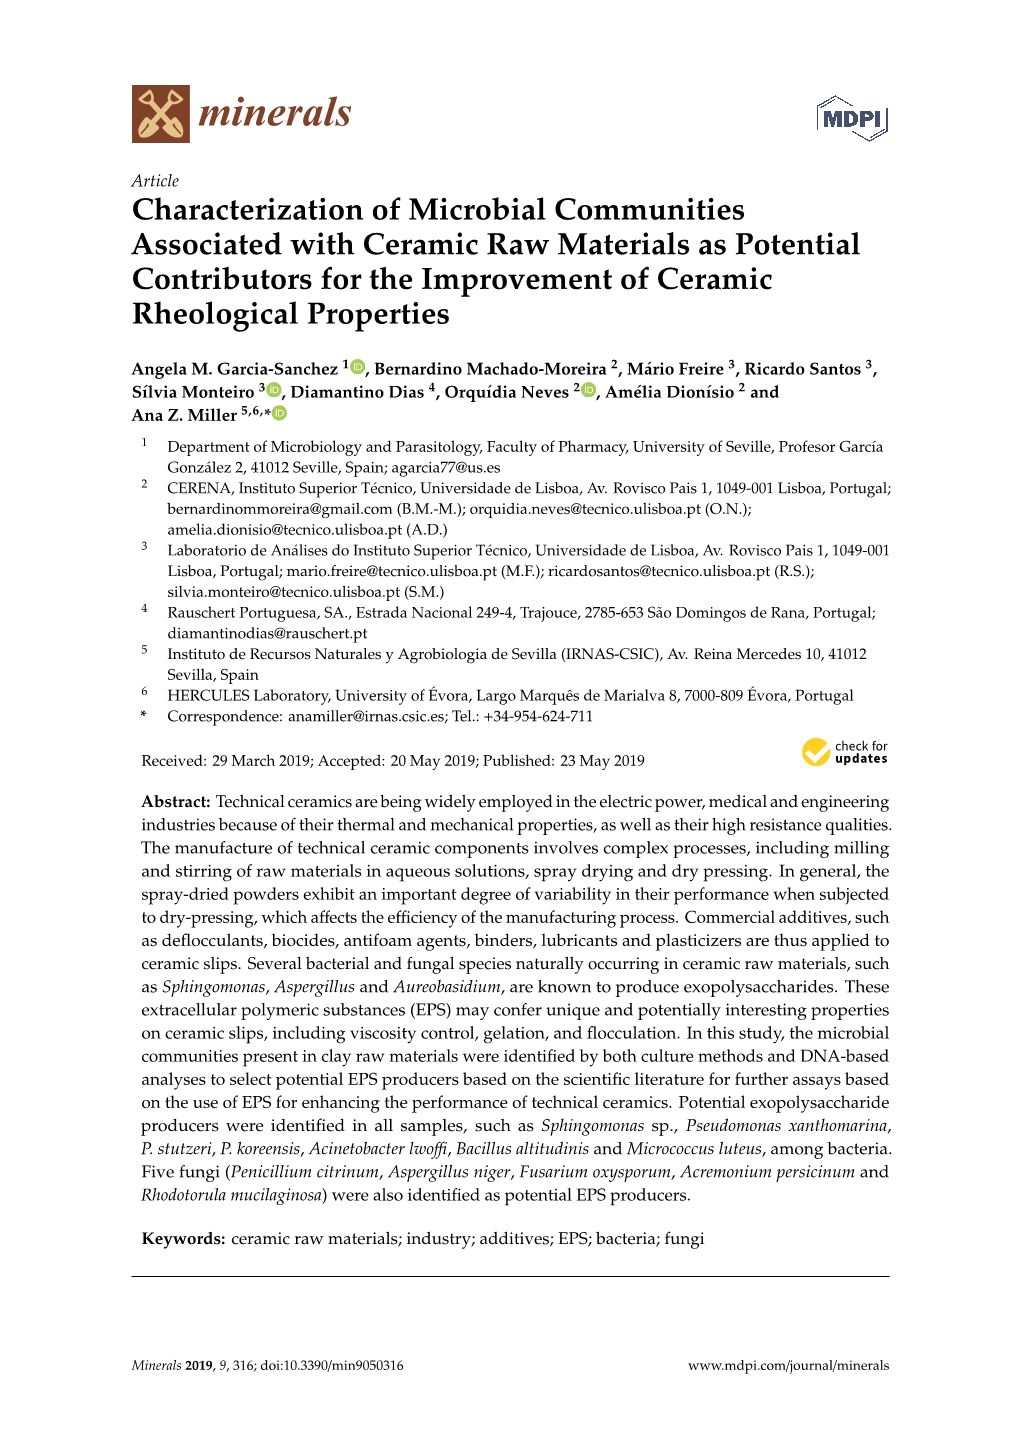 Characterization of Microbial Communities Associated with Ceramic Raw Materials As Potential Contributors for the Improvement of Ceramic Rheological Properties